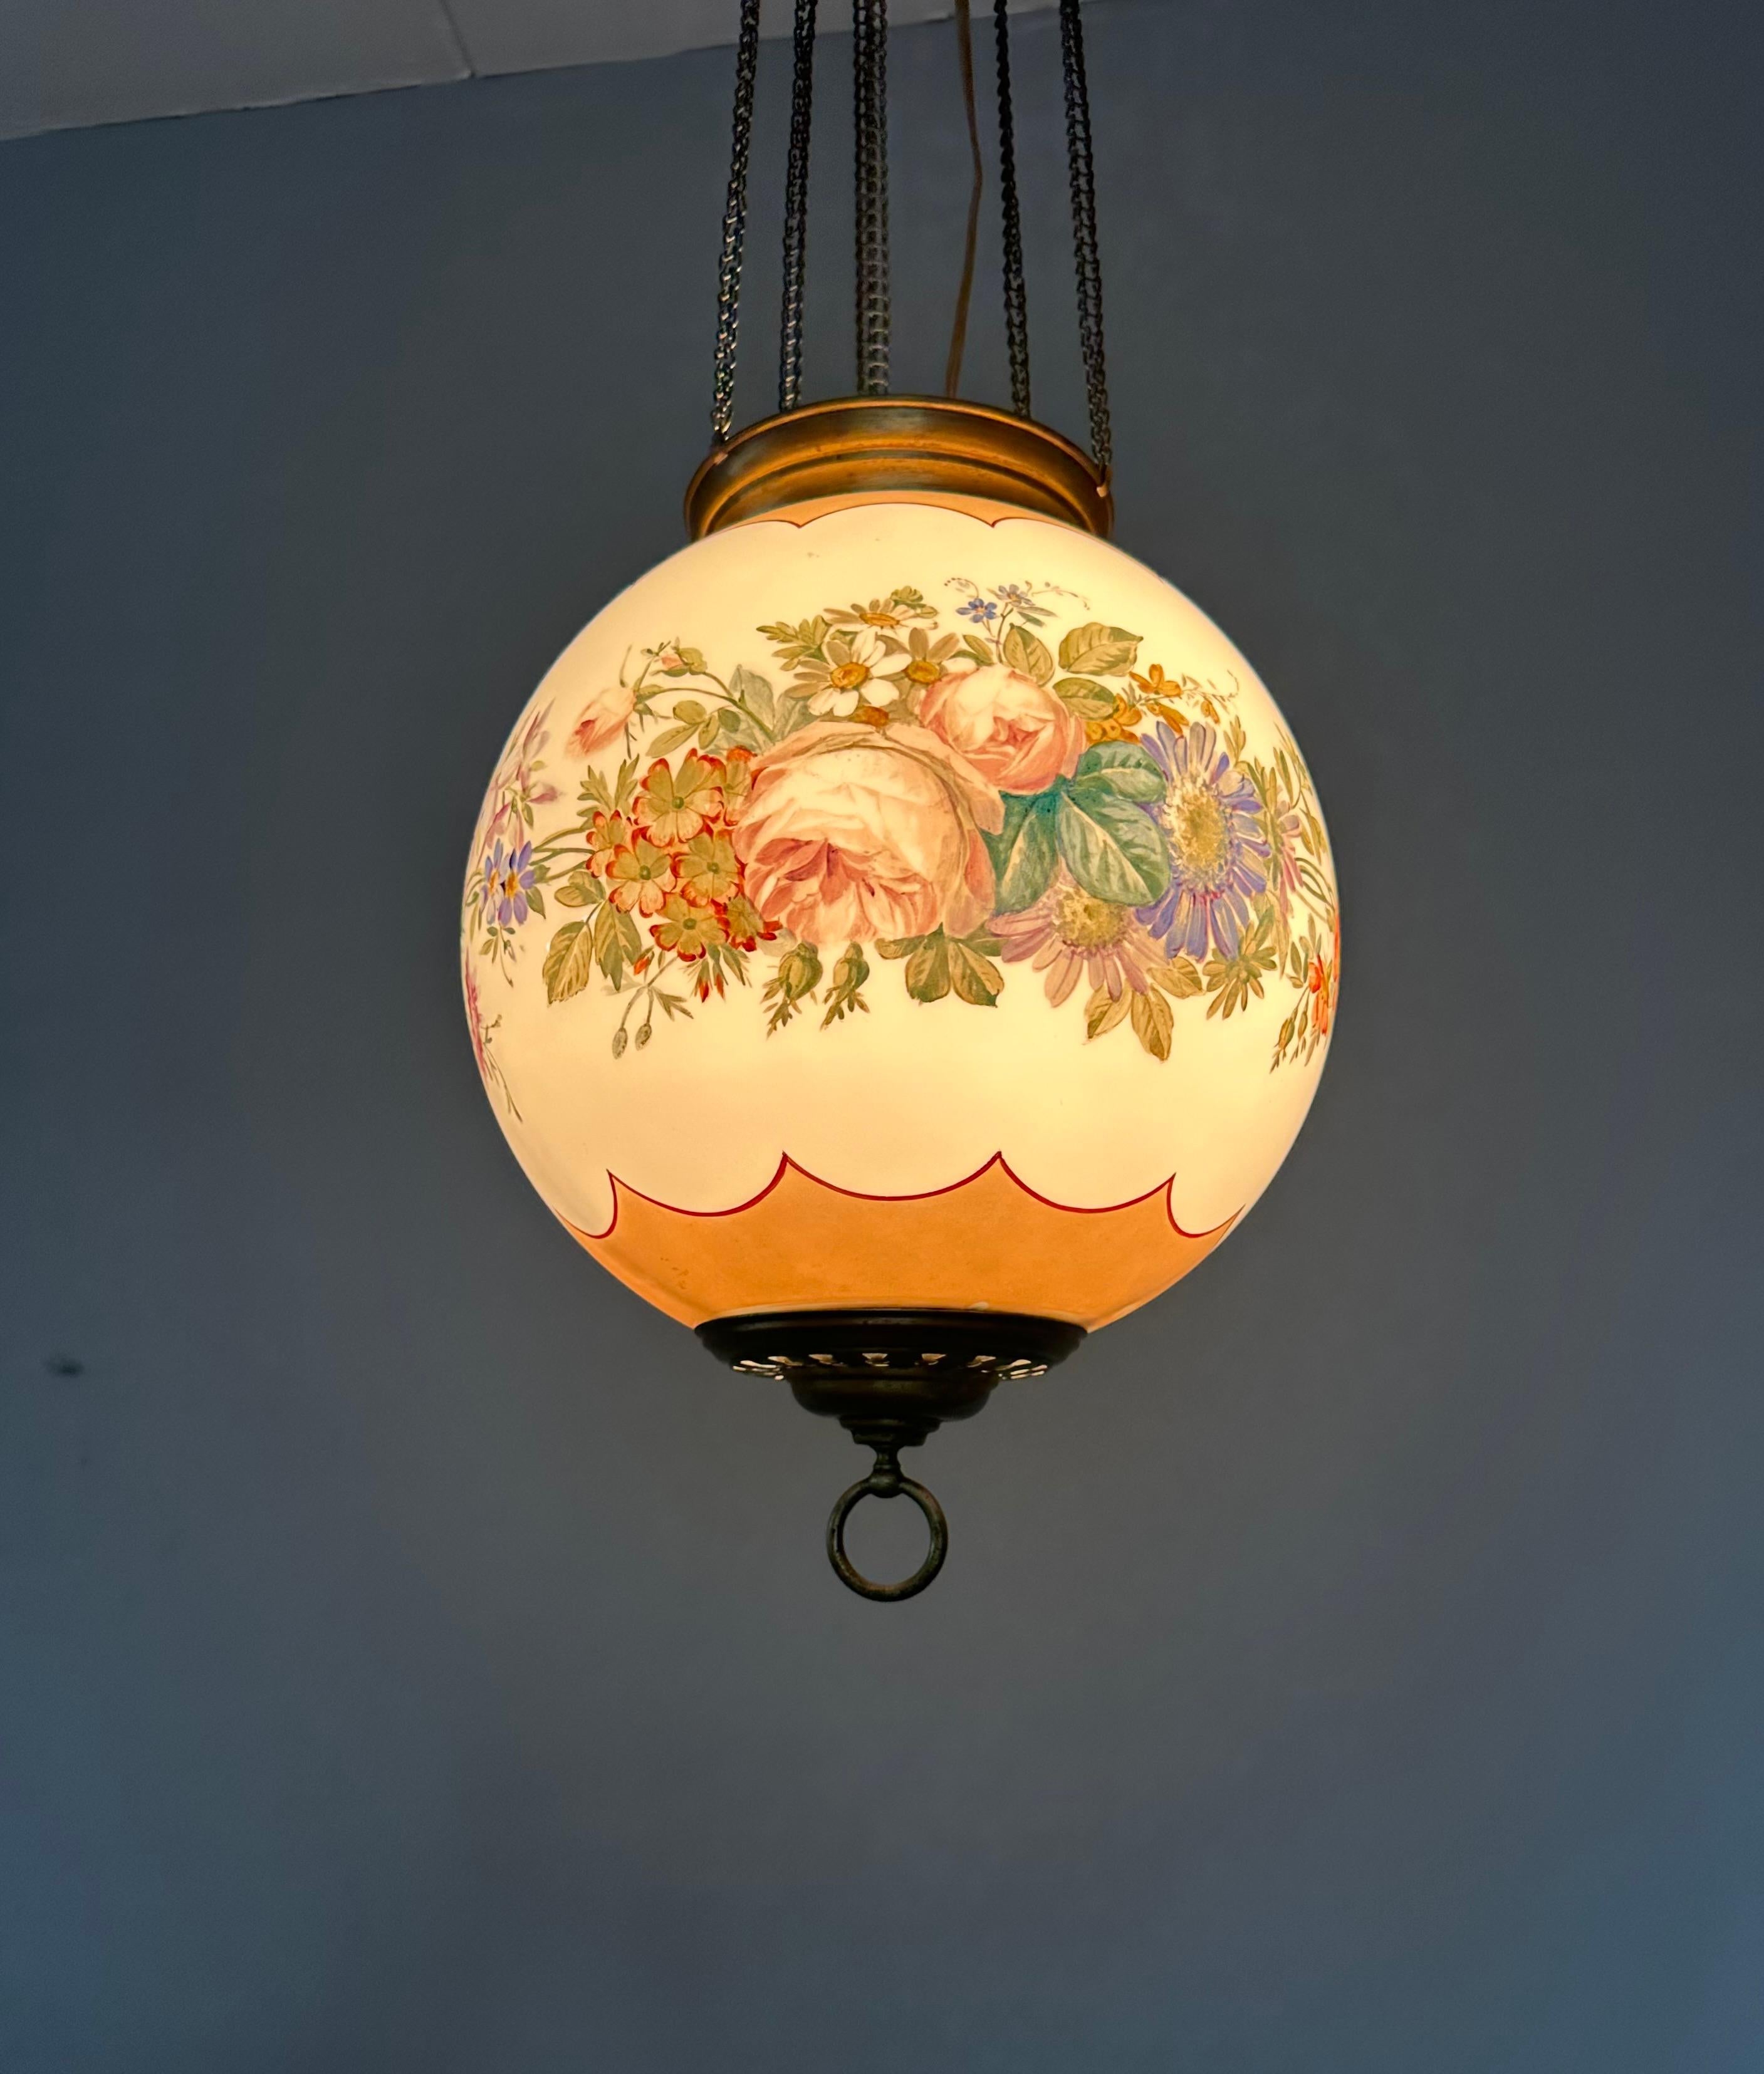 Antique Round Opaline Glass Shade Pendant Light with Wreath of Flowers Decor For Sale 8